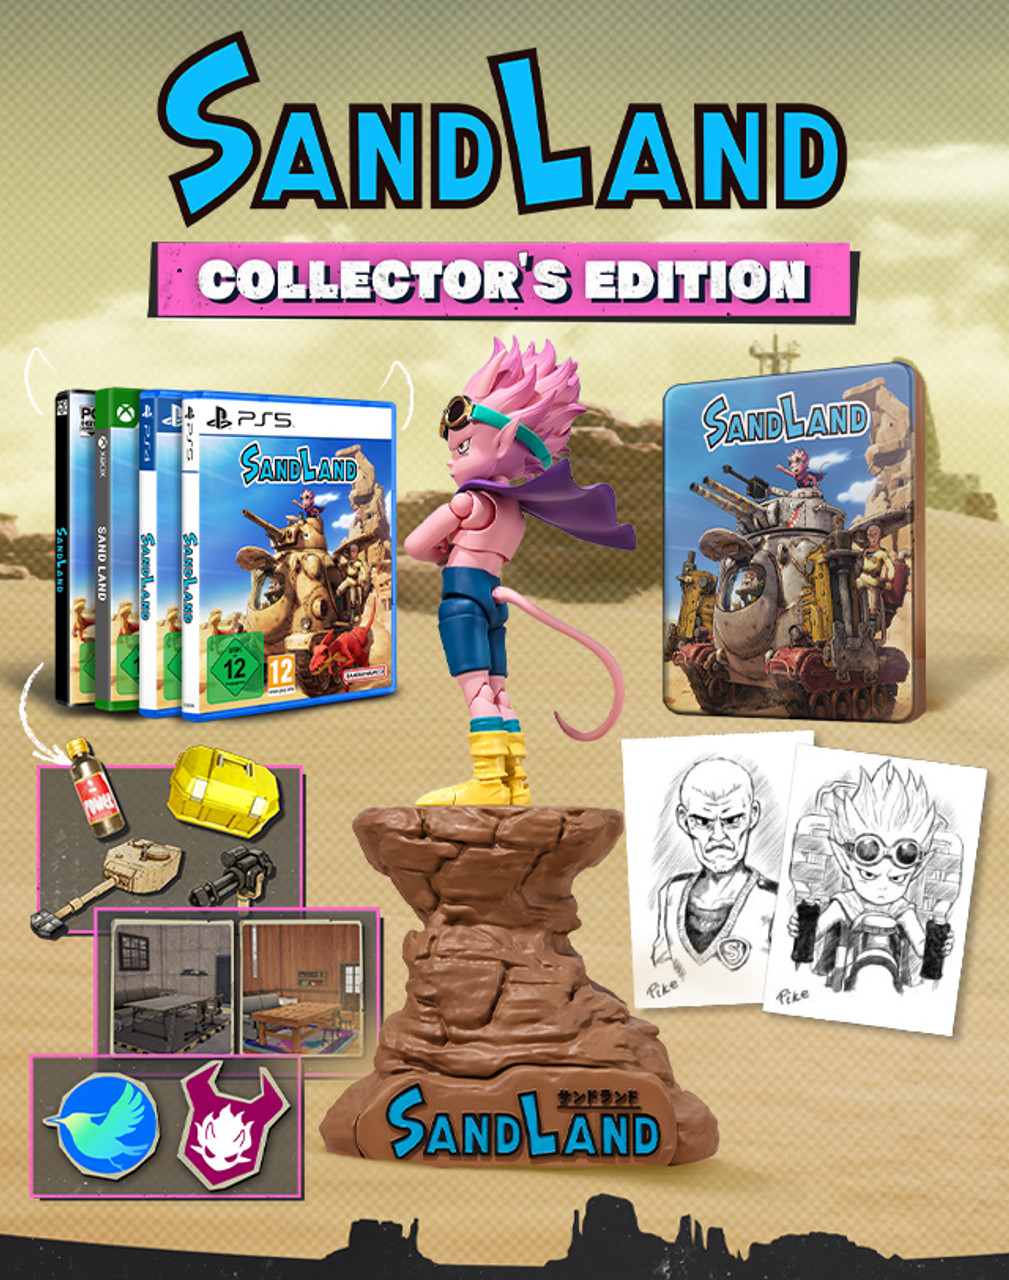 SAND LAND Physical Full Game [PS5] - COLLECTOR'S EDITION UE